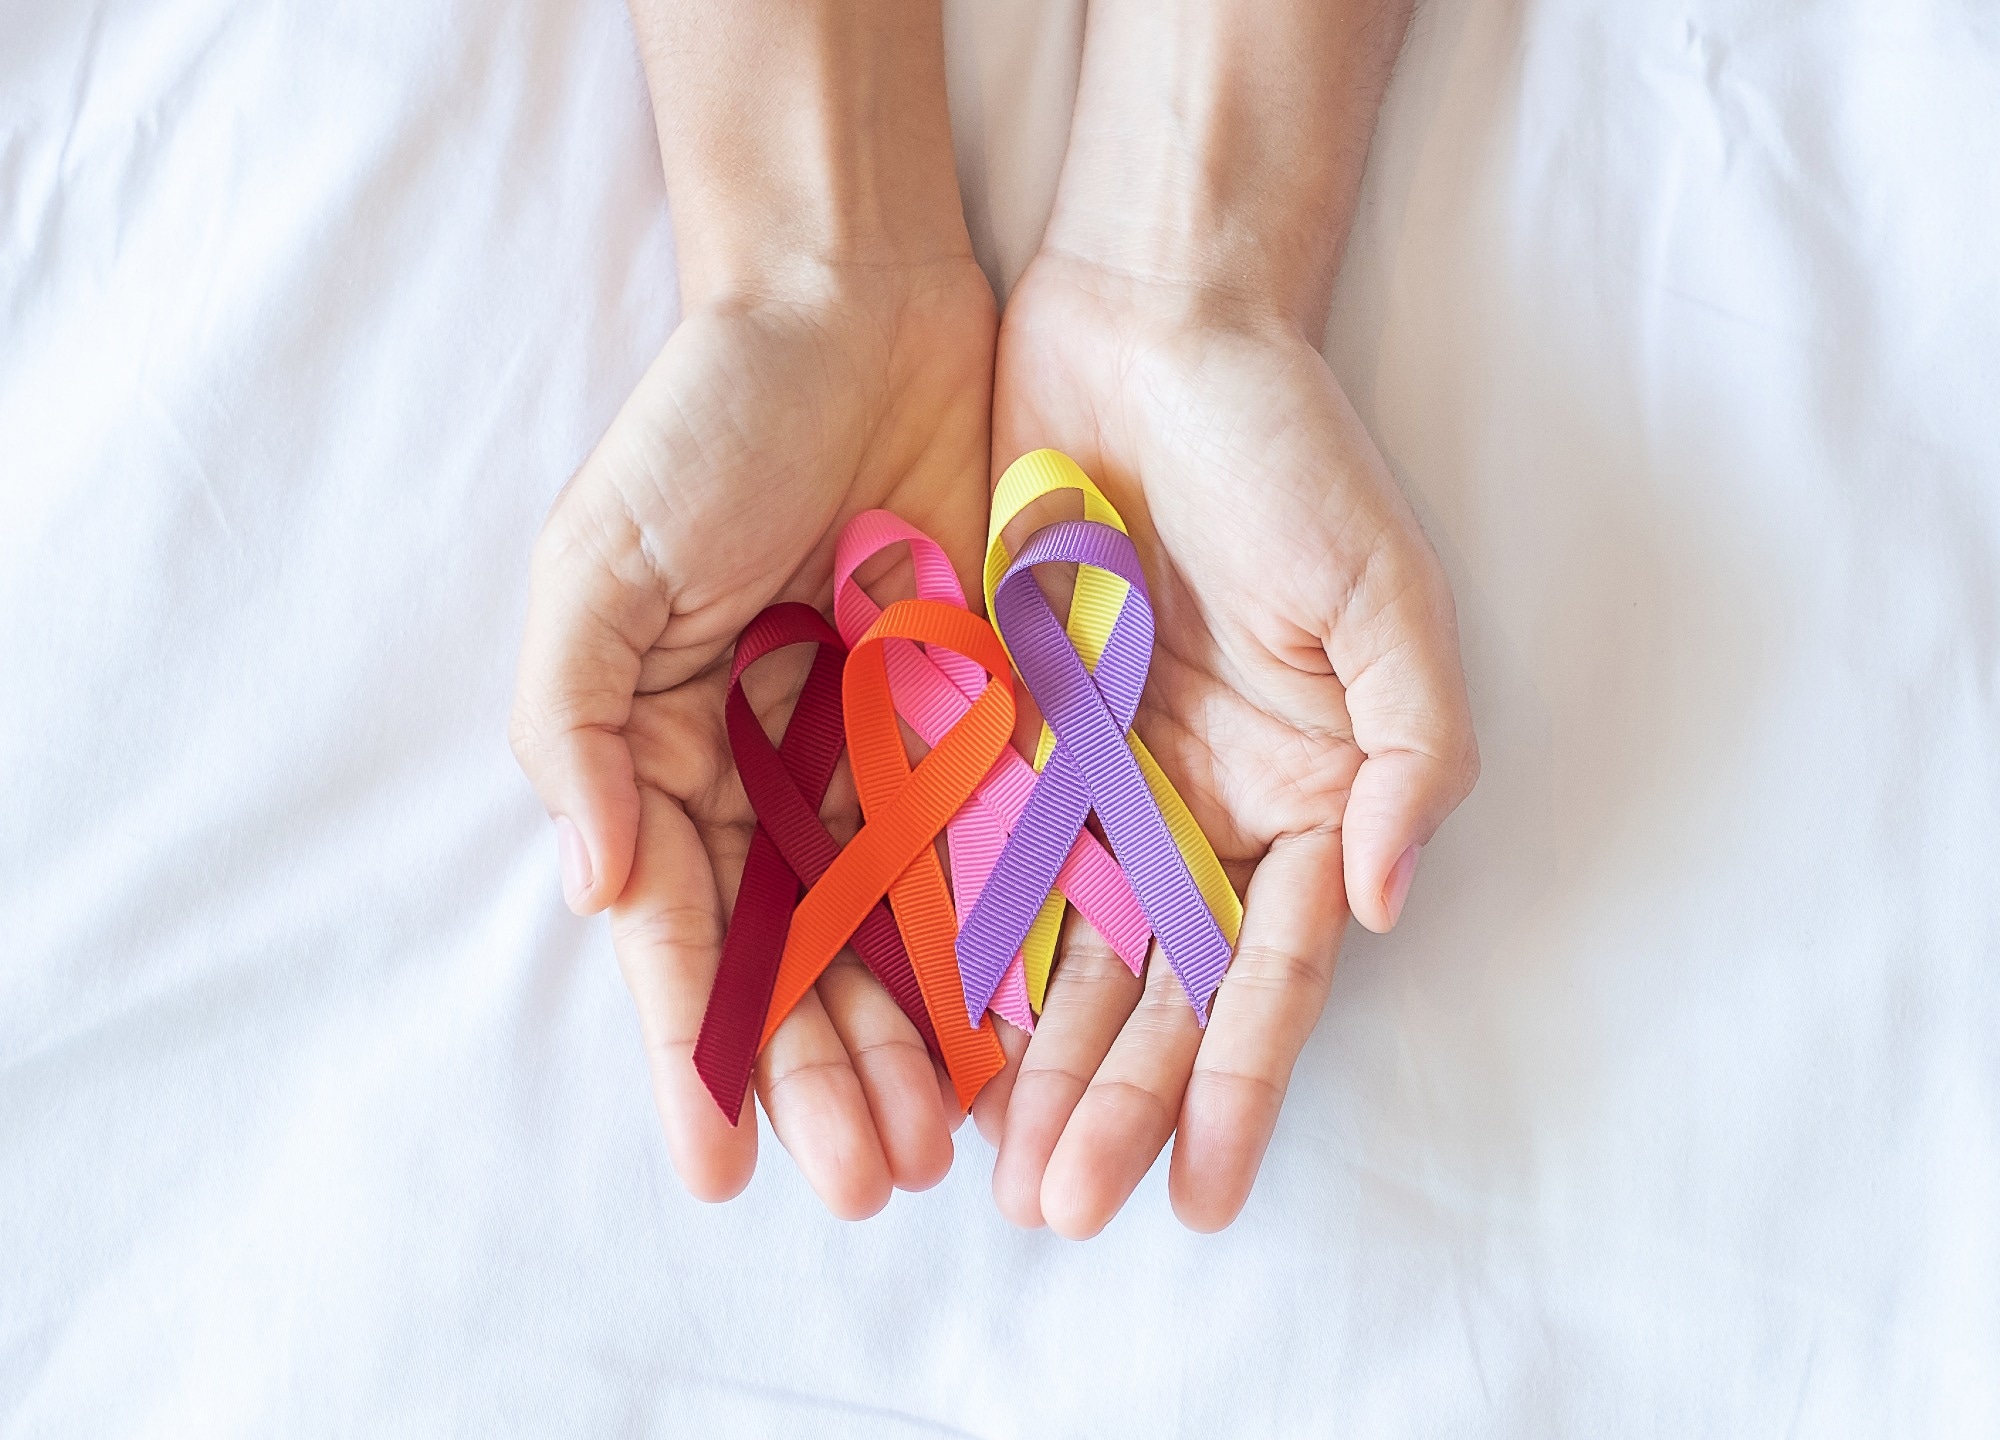 Study: Global trends in incidence, death, burden and risk factors of early-onset cancer from 1990 to 2019. Image Credit: Jo Panuwat D / Shutterstock